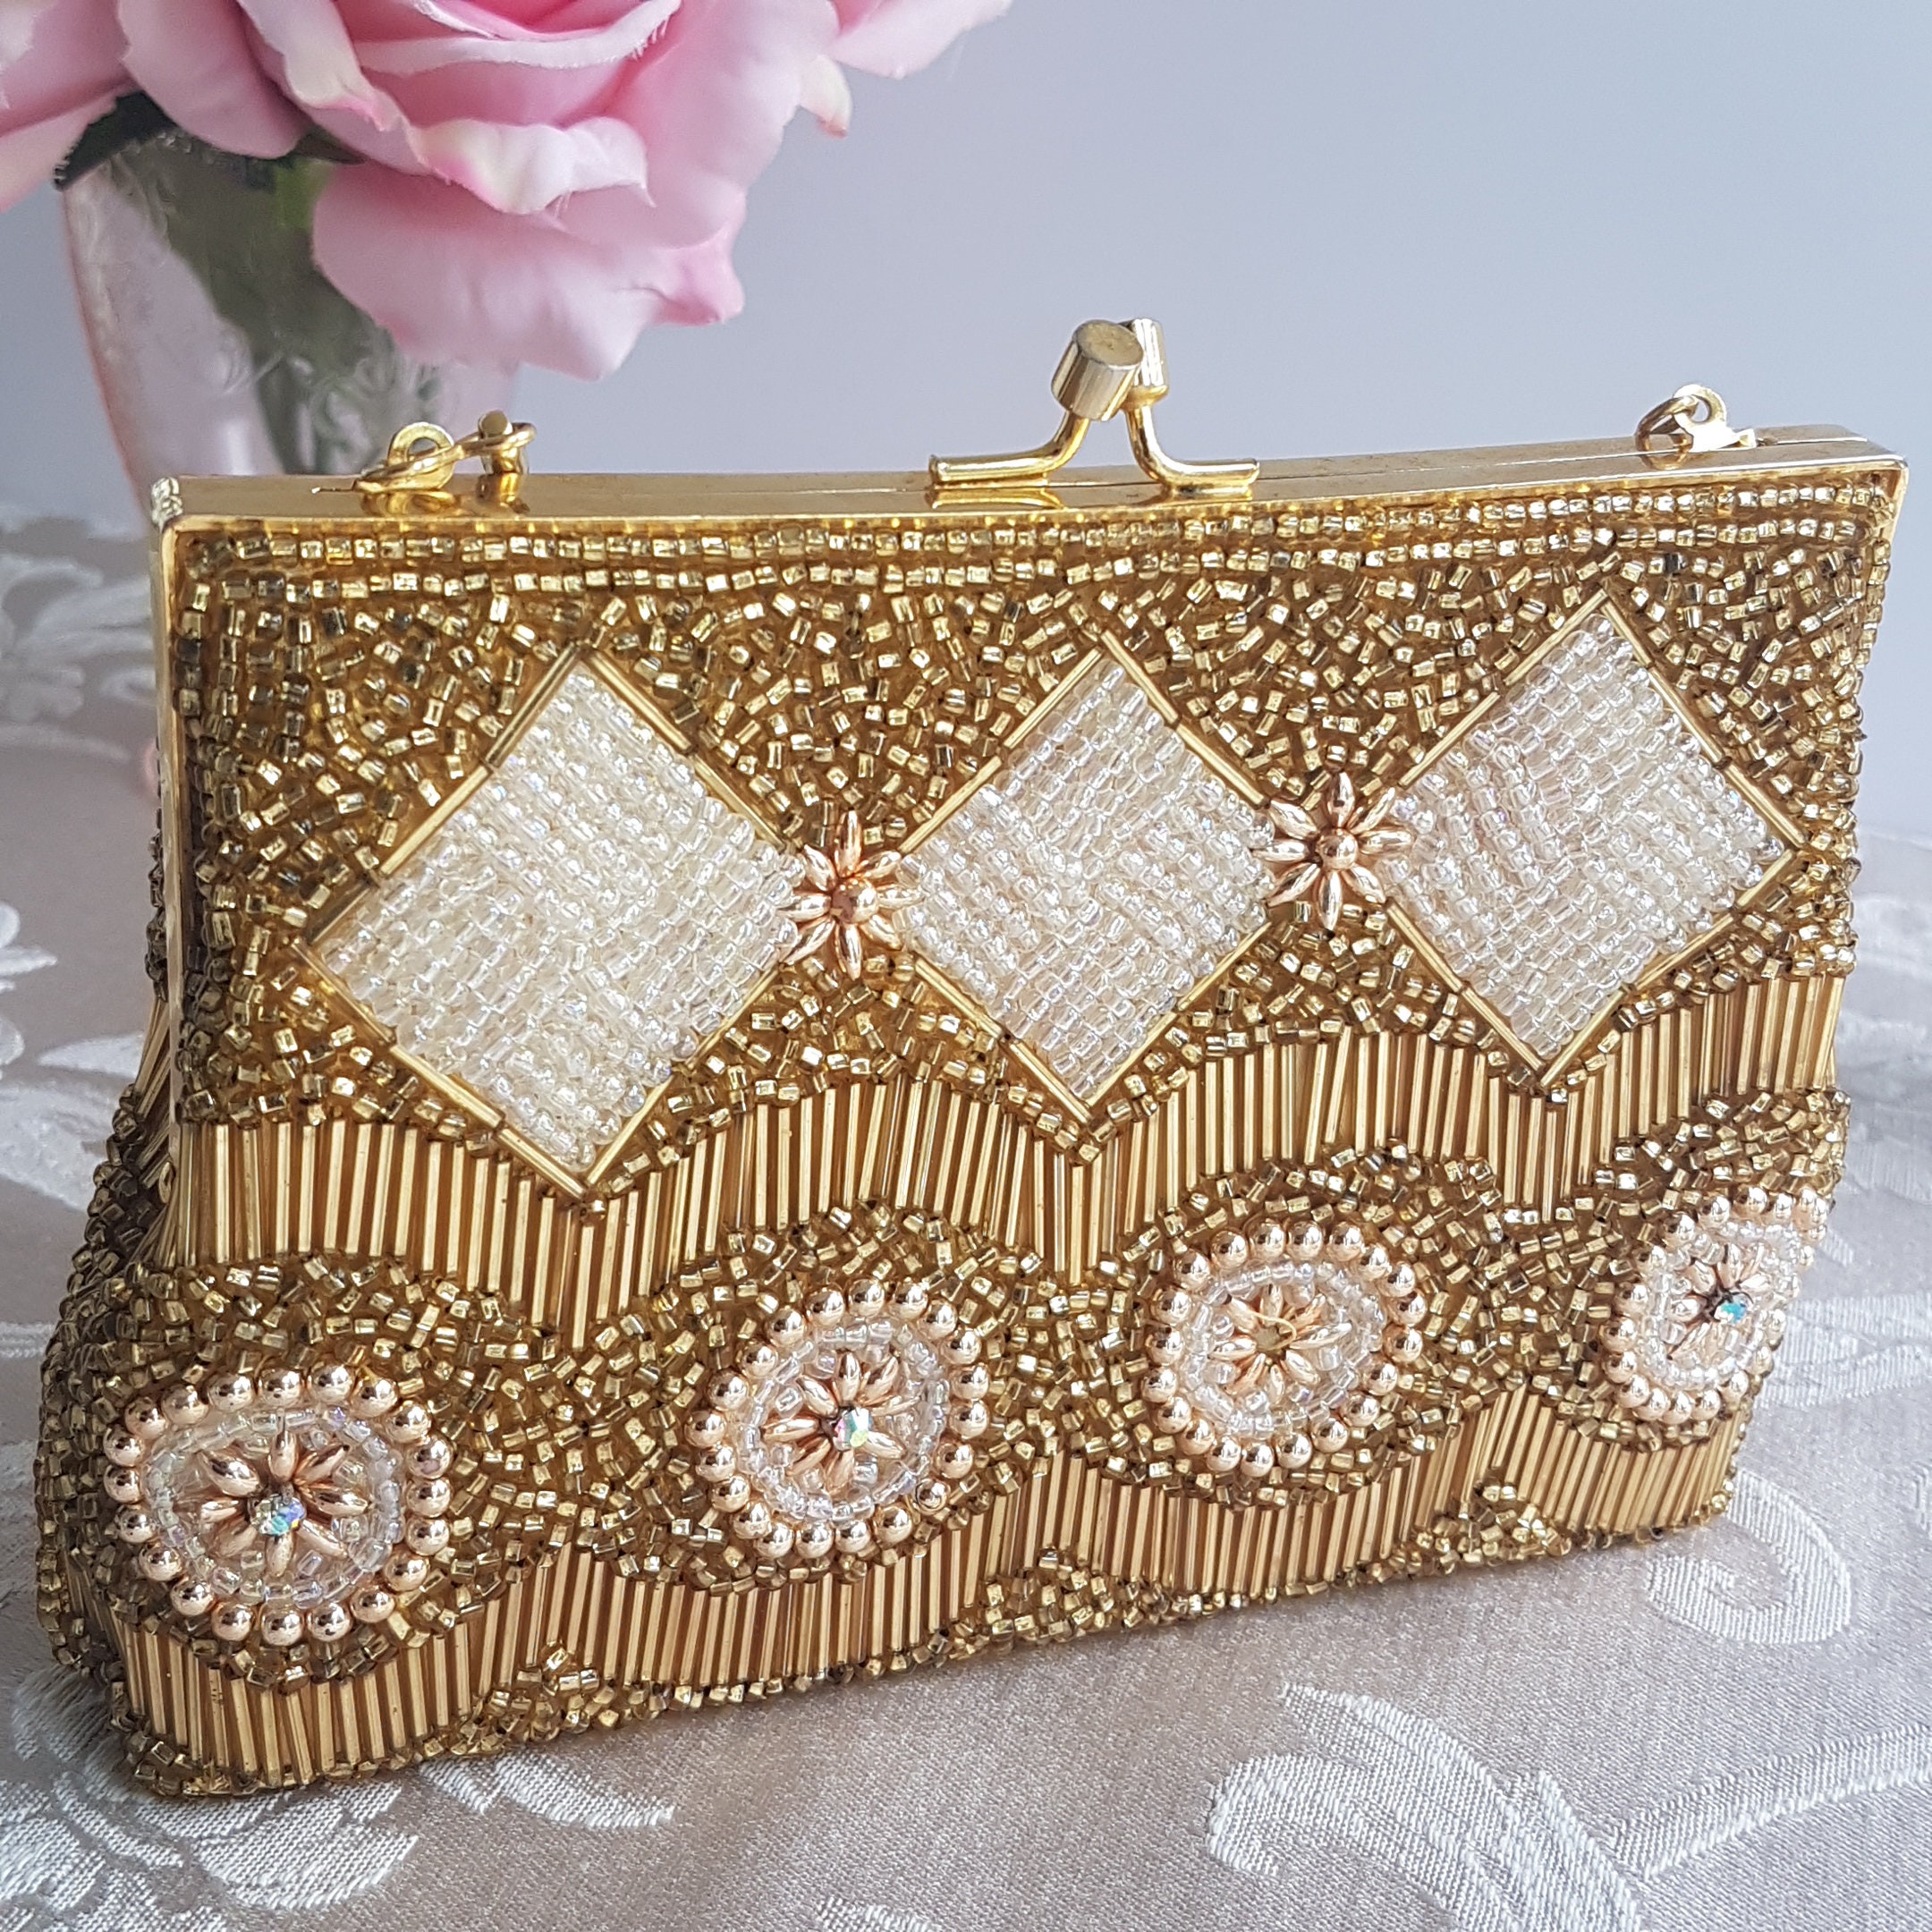 N6 Beautiful Vintage Beaded Evening Bag With Chain. Free 